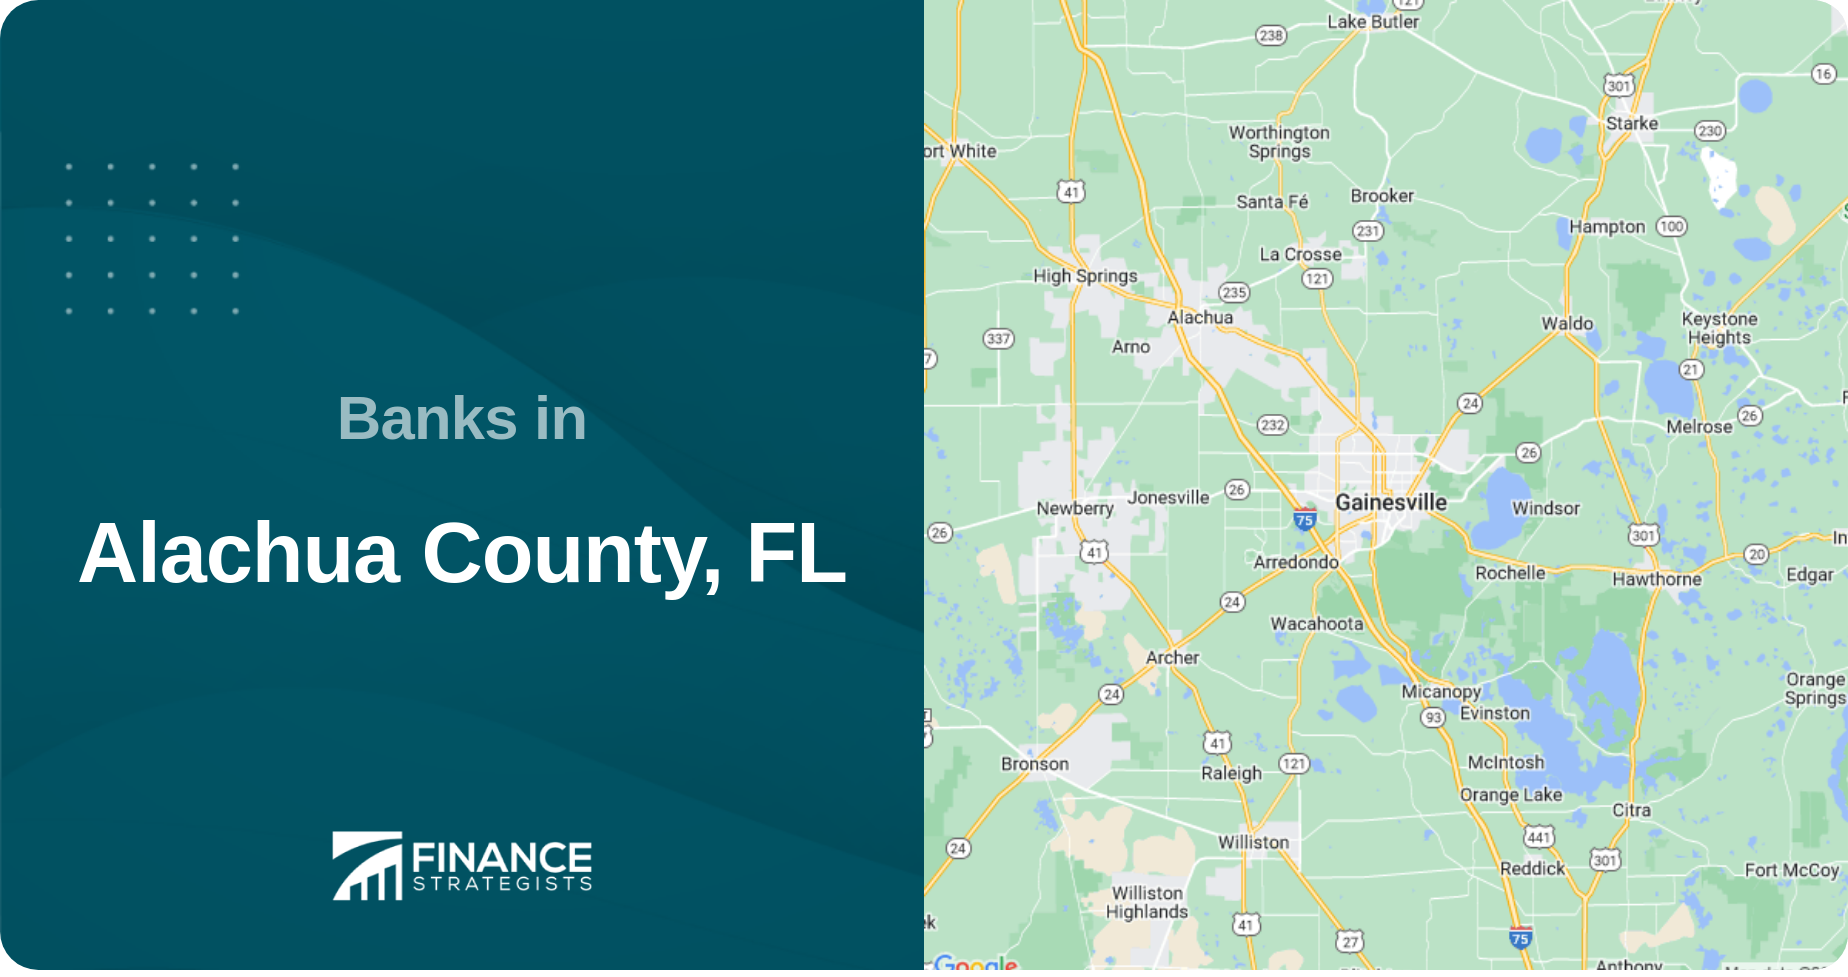 Banks in Alachua County, FL